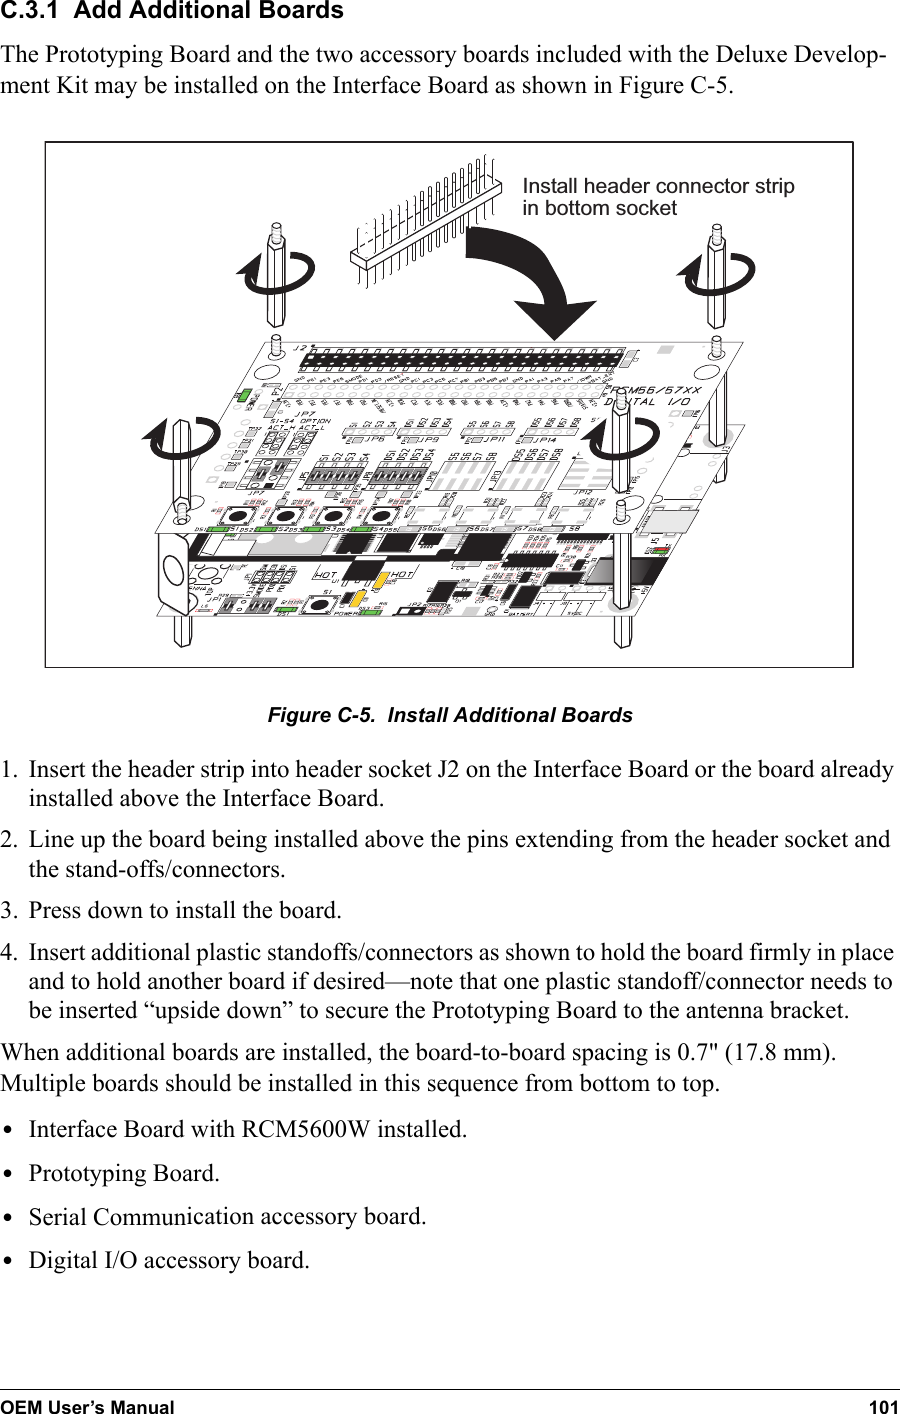 OEM User’s Manual 101C.3.1  Add Additional BoardsThe Prototyping Board and the two accessory boards included with the Deluxe Develop-ment Kit may be installed on the Interface Board as shown in Figure C-5.Install header connector stripin bottom socketFigure C-5.  Install Additional Boards1. Insert the header strip into header socket J2 on the Interface Board or the board already installed above the Interface Board.2. Line up the board being installed above the pins extending from the header socket and the stand-offs/connectors.3. Press down to install the board.4. Insert additional plastic standoffs/connectors as shown to hold the board firmly in place and to hold another board if desired—note that one plastic standoff/connector needs to be inserted “upside down” to secure the Prototyping Board to the antenna bracket.When additional boards are installed, the board-to-board spacing is 0.7&quot; (17.8 mm). Multiple boards should be installed in this sequence from bottom to top.•Interface Board with RCM5600W installed.•Prototyping Board.•Serial Communication accessory board.•Digital I/O accessory board.